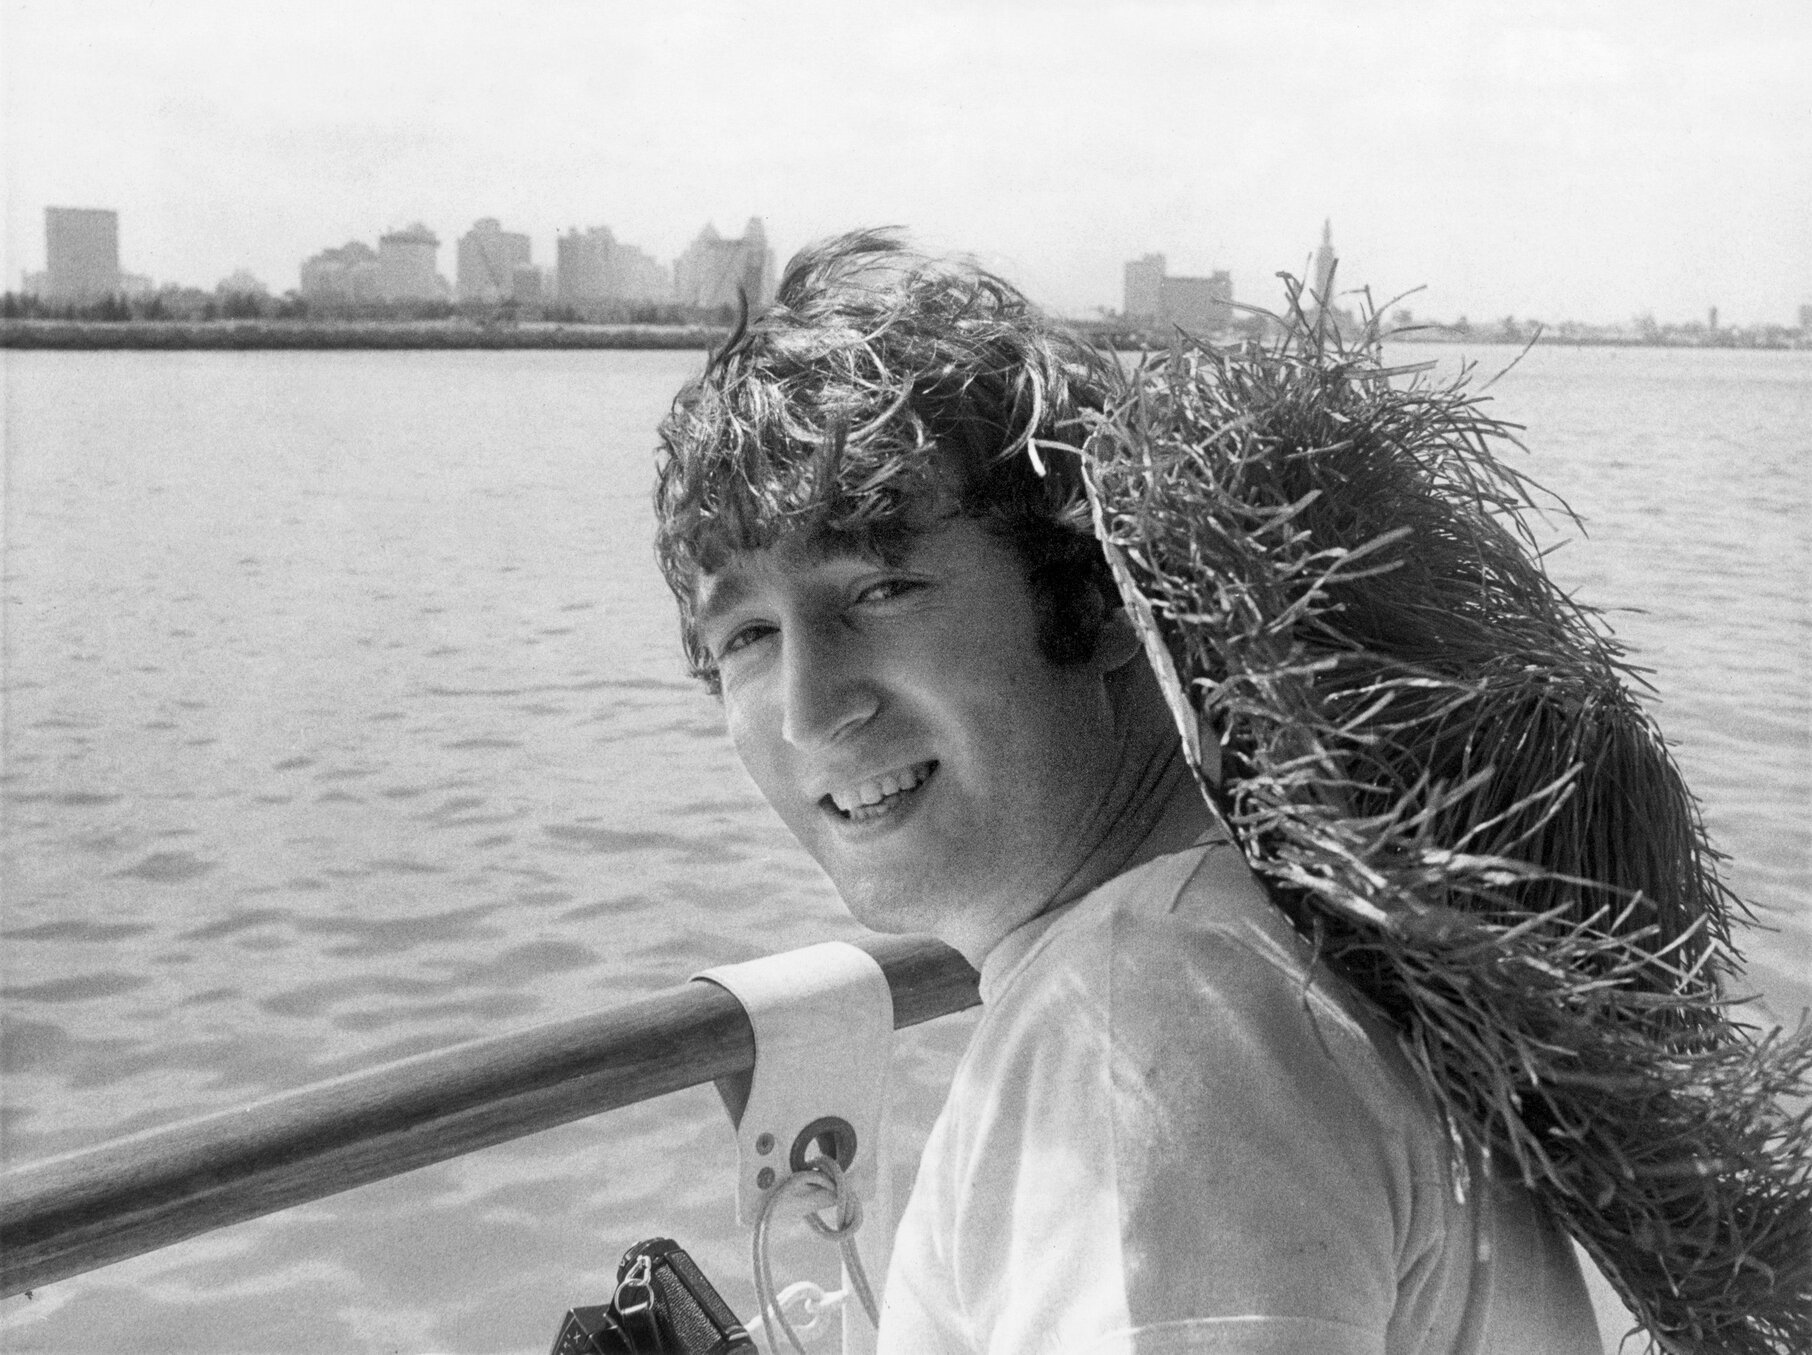 John Lennon wearing a grass and straw hat in Miami, Florida in 1964.